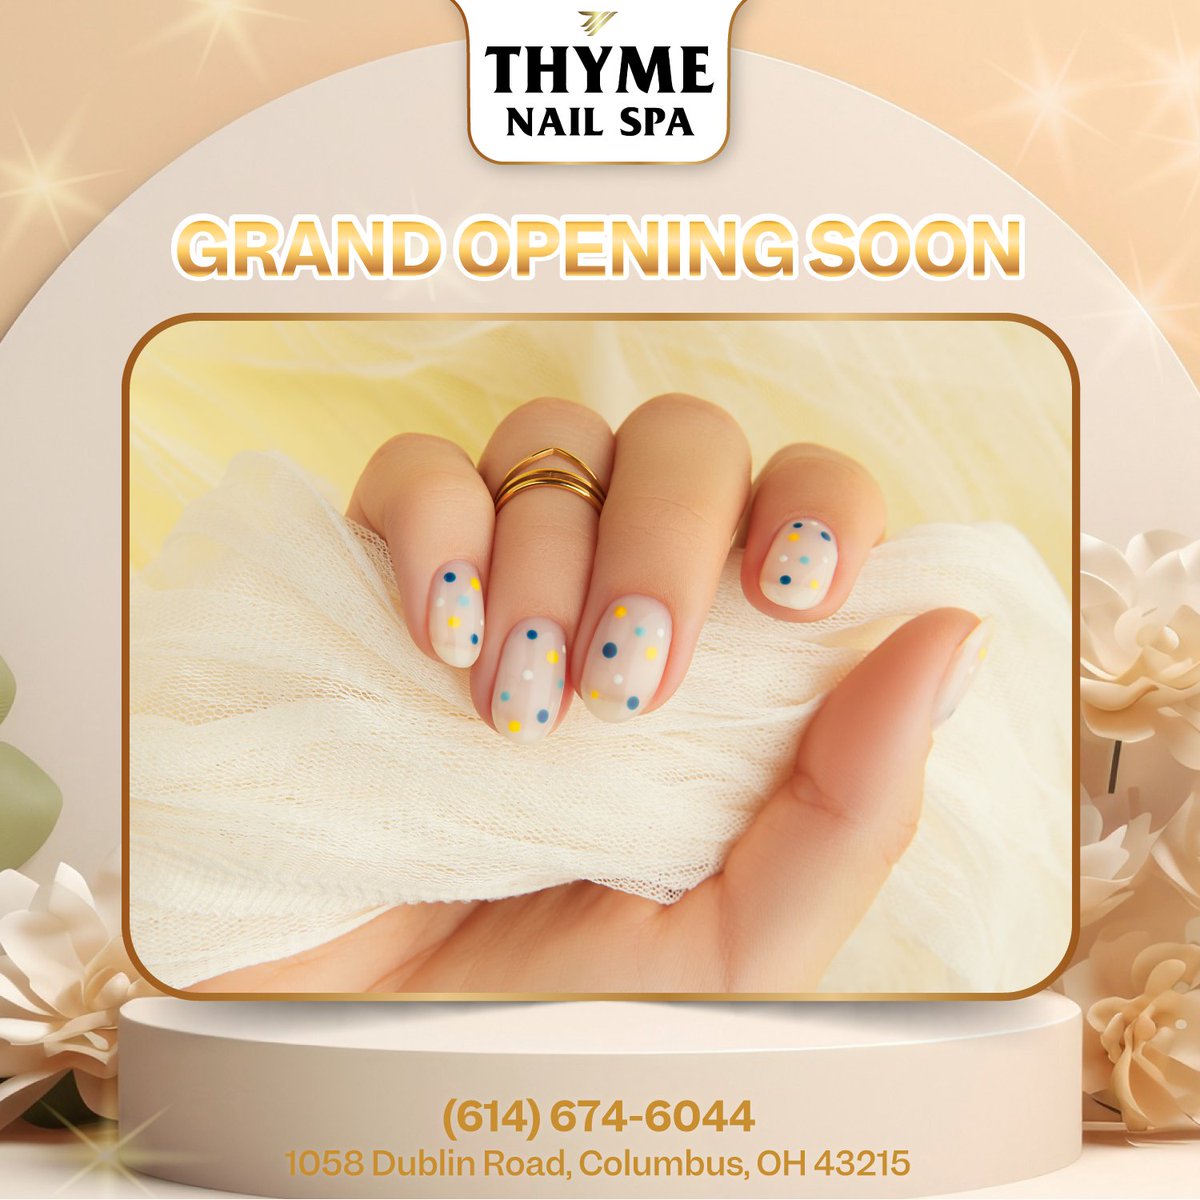 Follow us, stay tuned, and look forward to our Grand Opening day!🔥✨

#Thymenailspa #nailsalon #nailsalonoh #pedicure #manicure #beauty #nailsalon #nailsalonnearme #nail #gelnails #nailstyle #nailsart #naildesign #nailpolish #grandopeningsoon #grandopening #openingsoon #promo